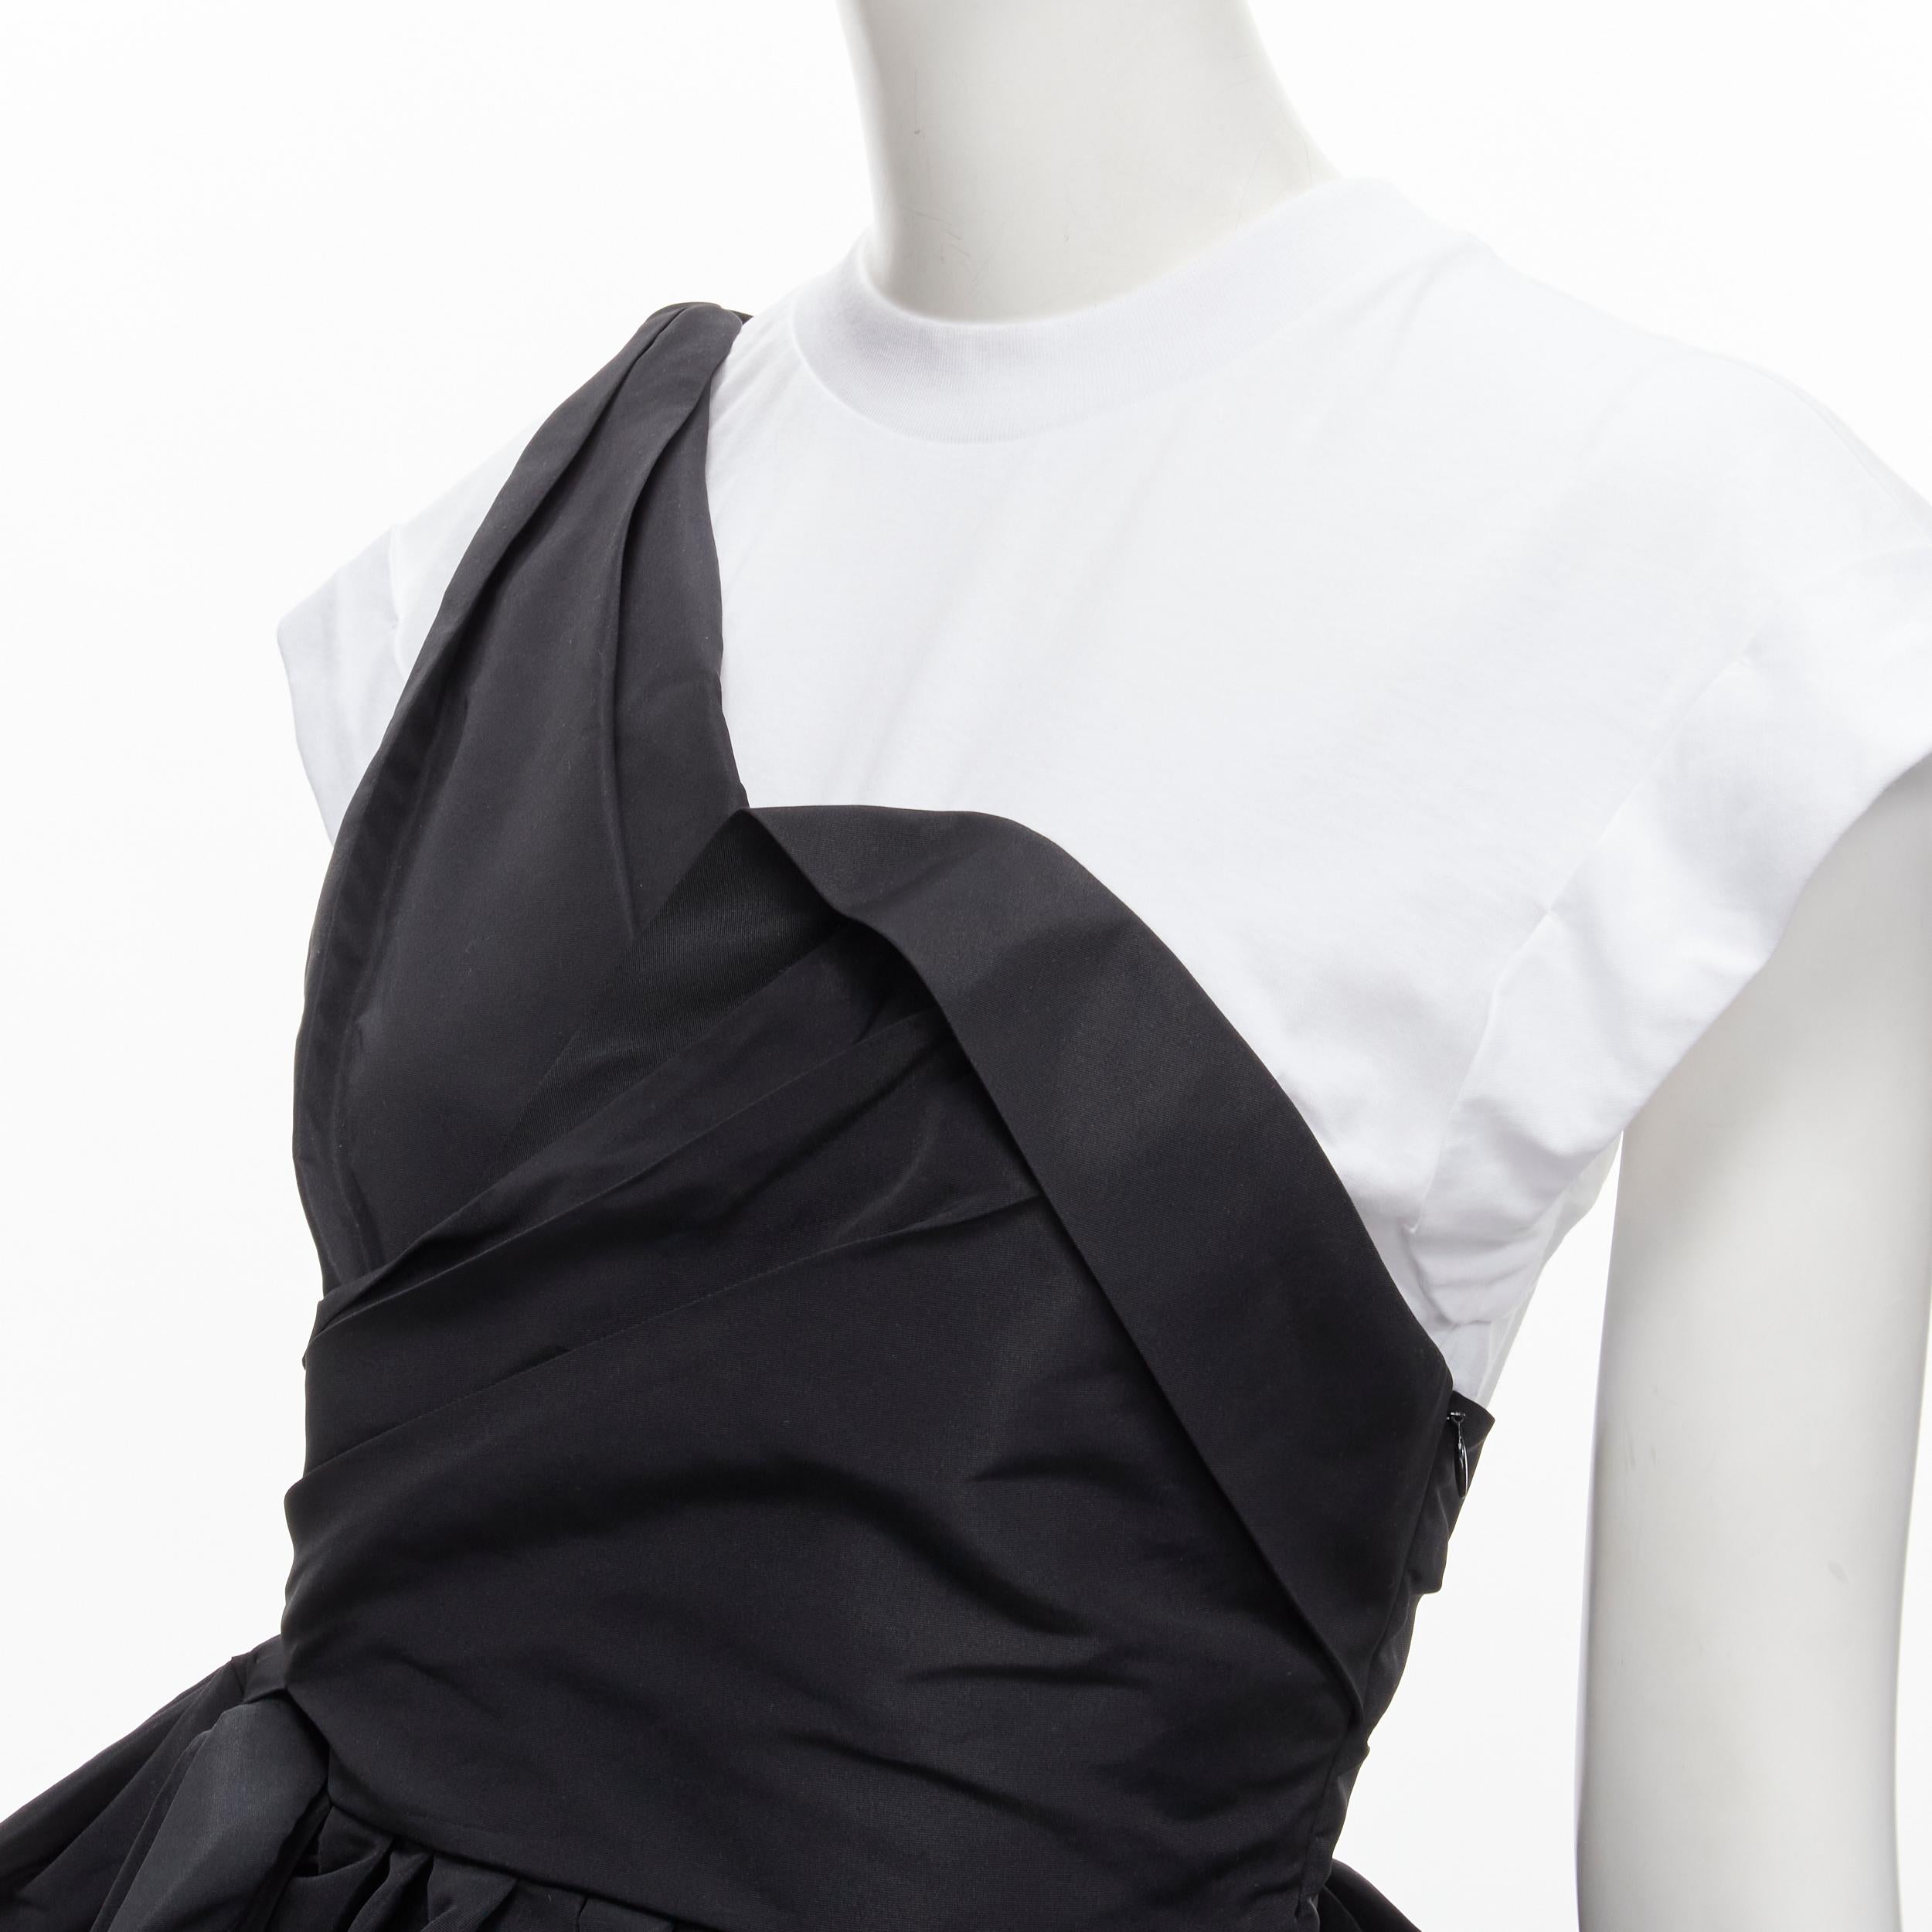 ALEXANDER MCQUEEN 2022 layered asymmetric crepe jersey peplum tshirt IT40 S
Brand: Alexander McQueen
Material: Polyester
Color: Black
Pattern: Solid
Closure: Zip
Extra Detail: Designed to look like a romantic crepe one shoulder peplum top was worn